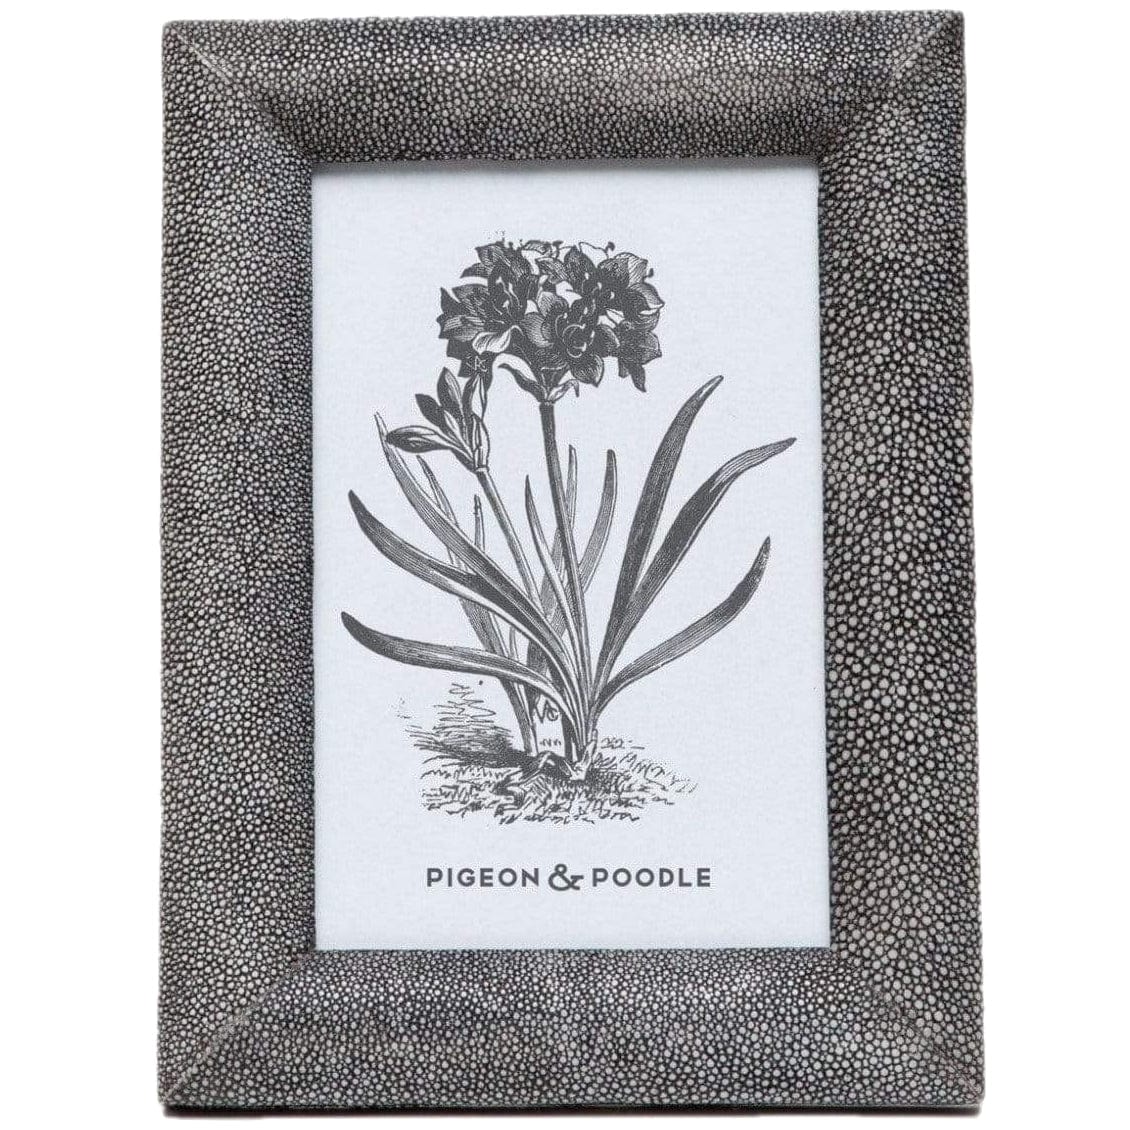 Pigeon & Poodle Oxford Picture Frame Pillow & Decor